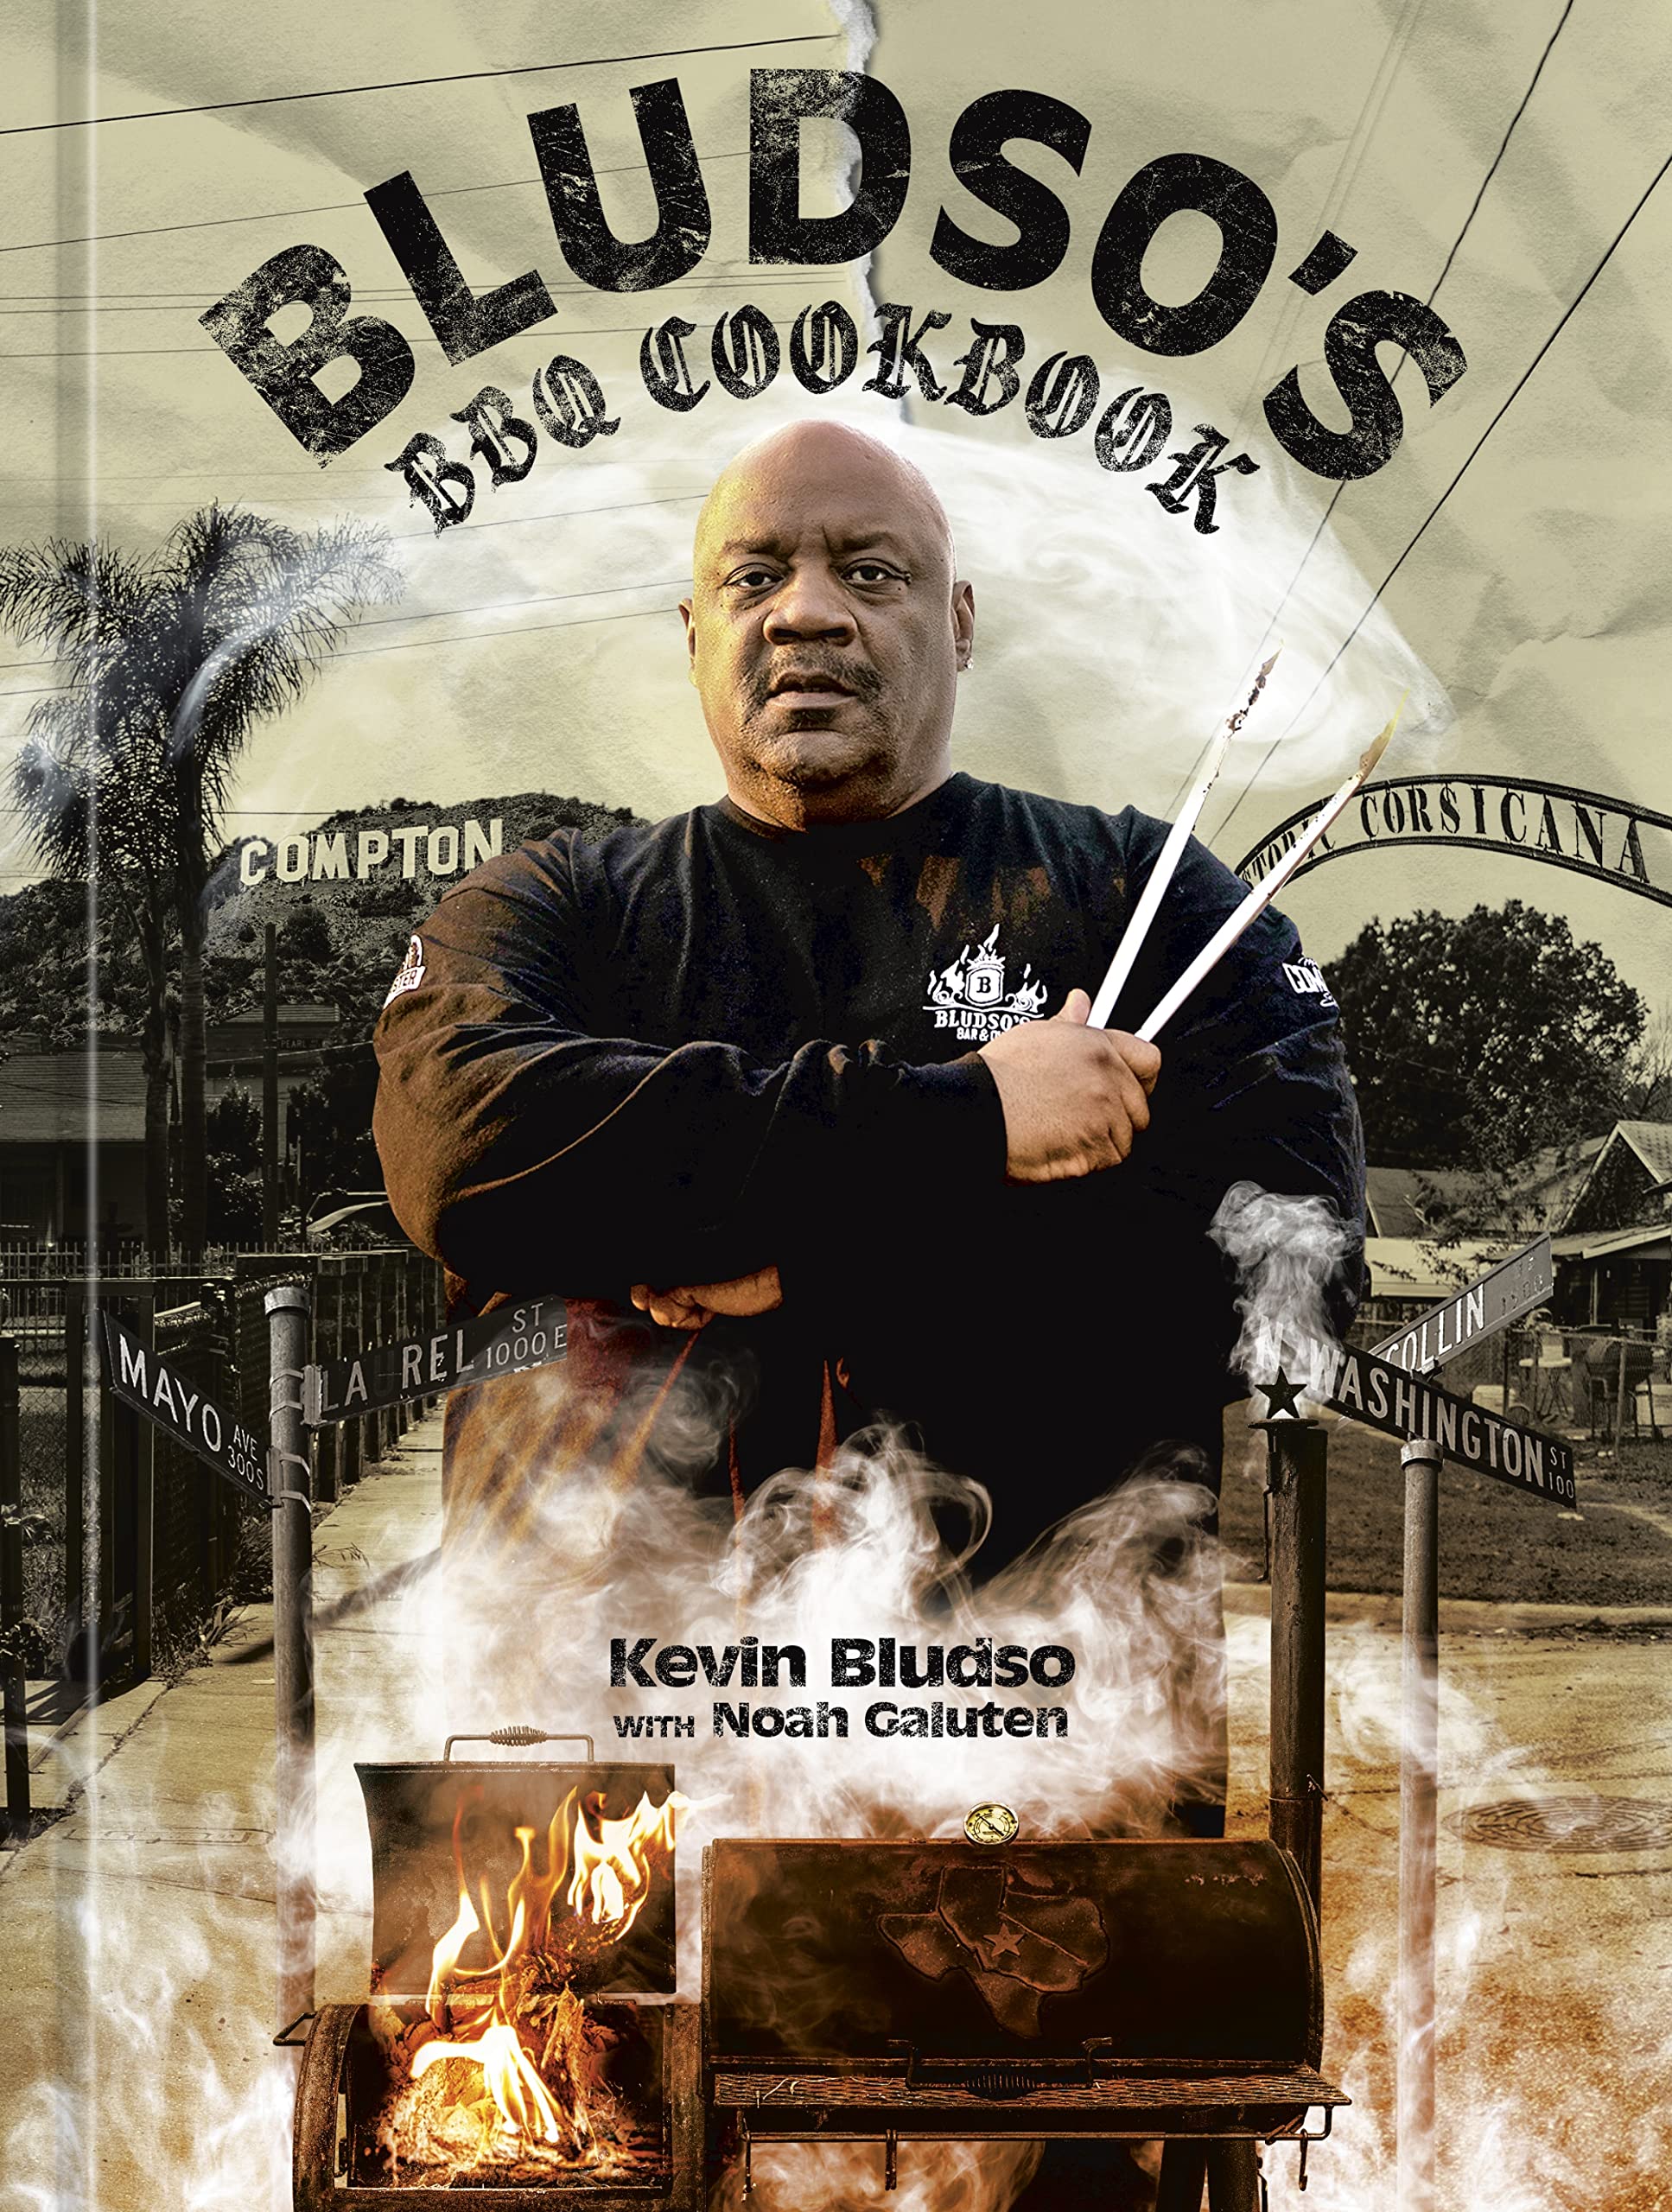 Bludso's BBQ Cookbook: A Family Affair in Smoke and Soul (Kevin Bludso, Noah Galuten) *Signed*